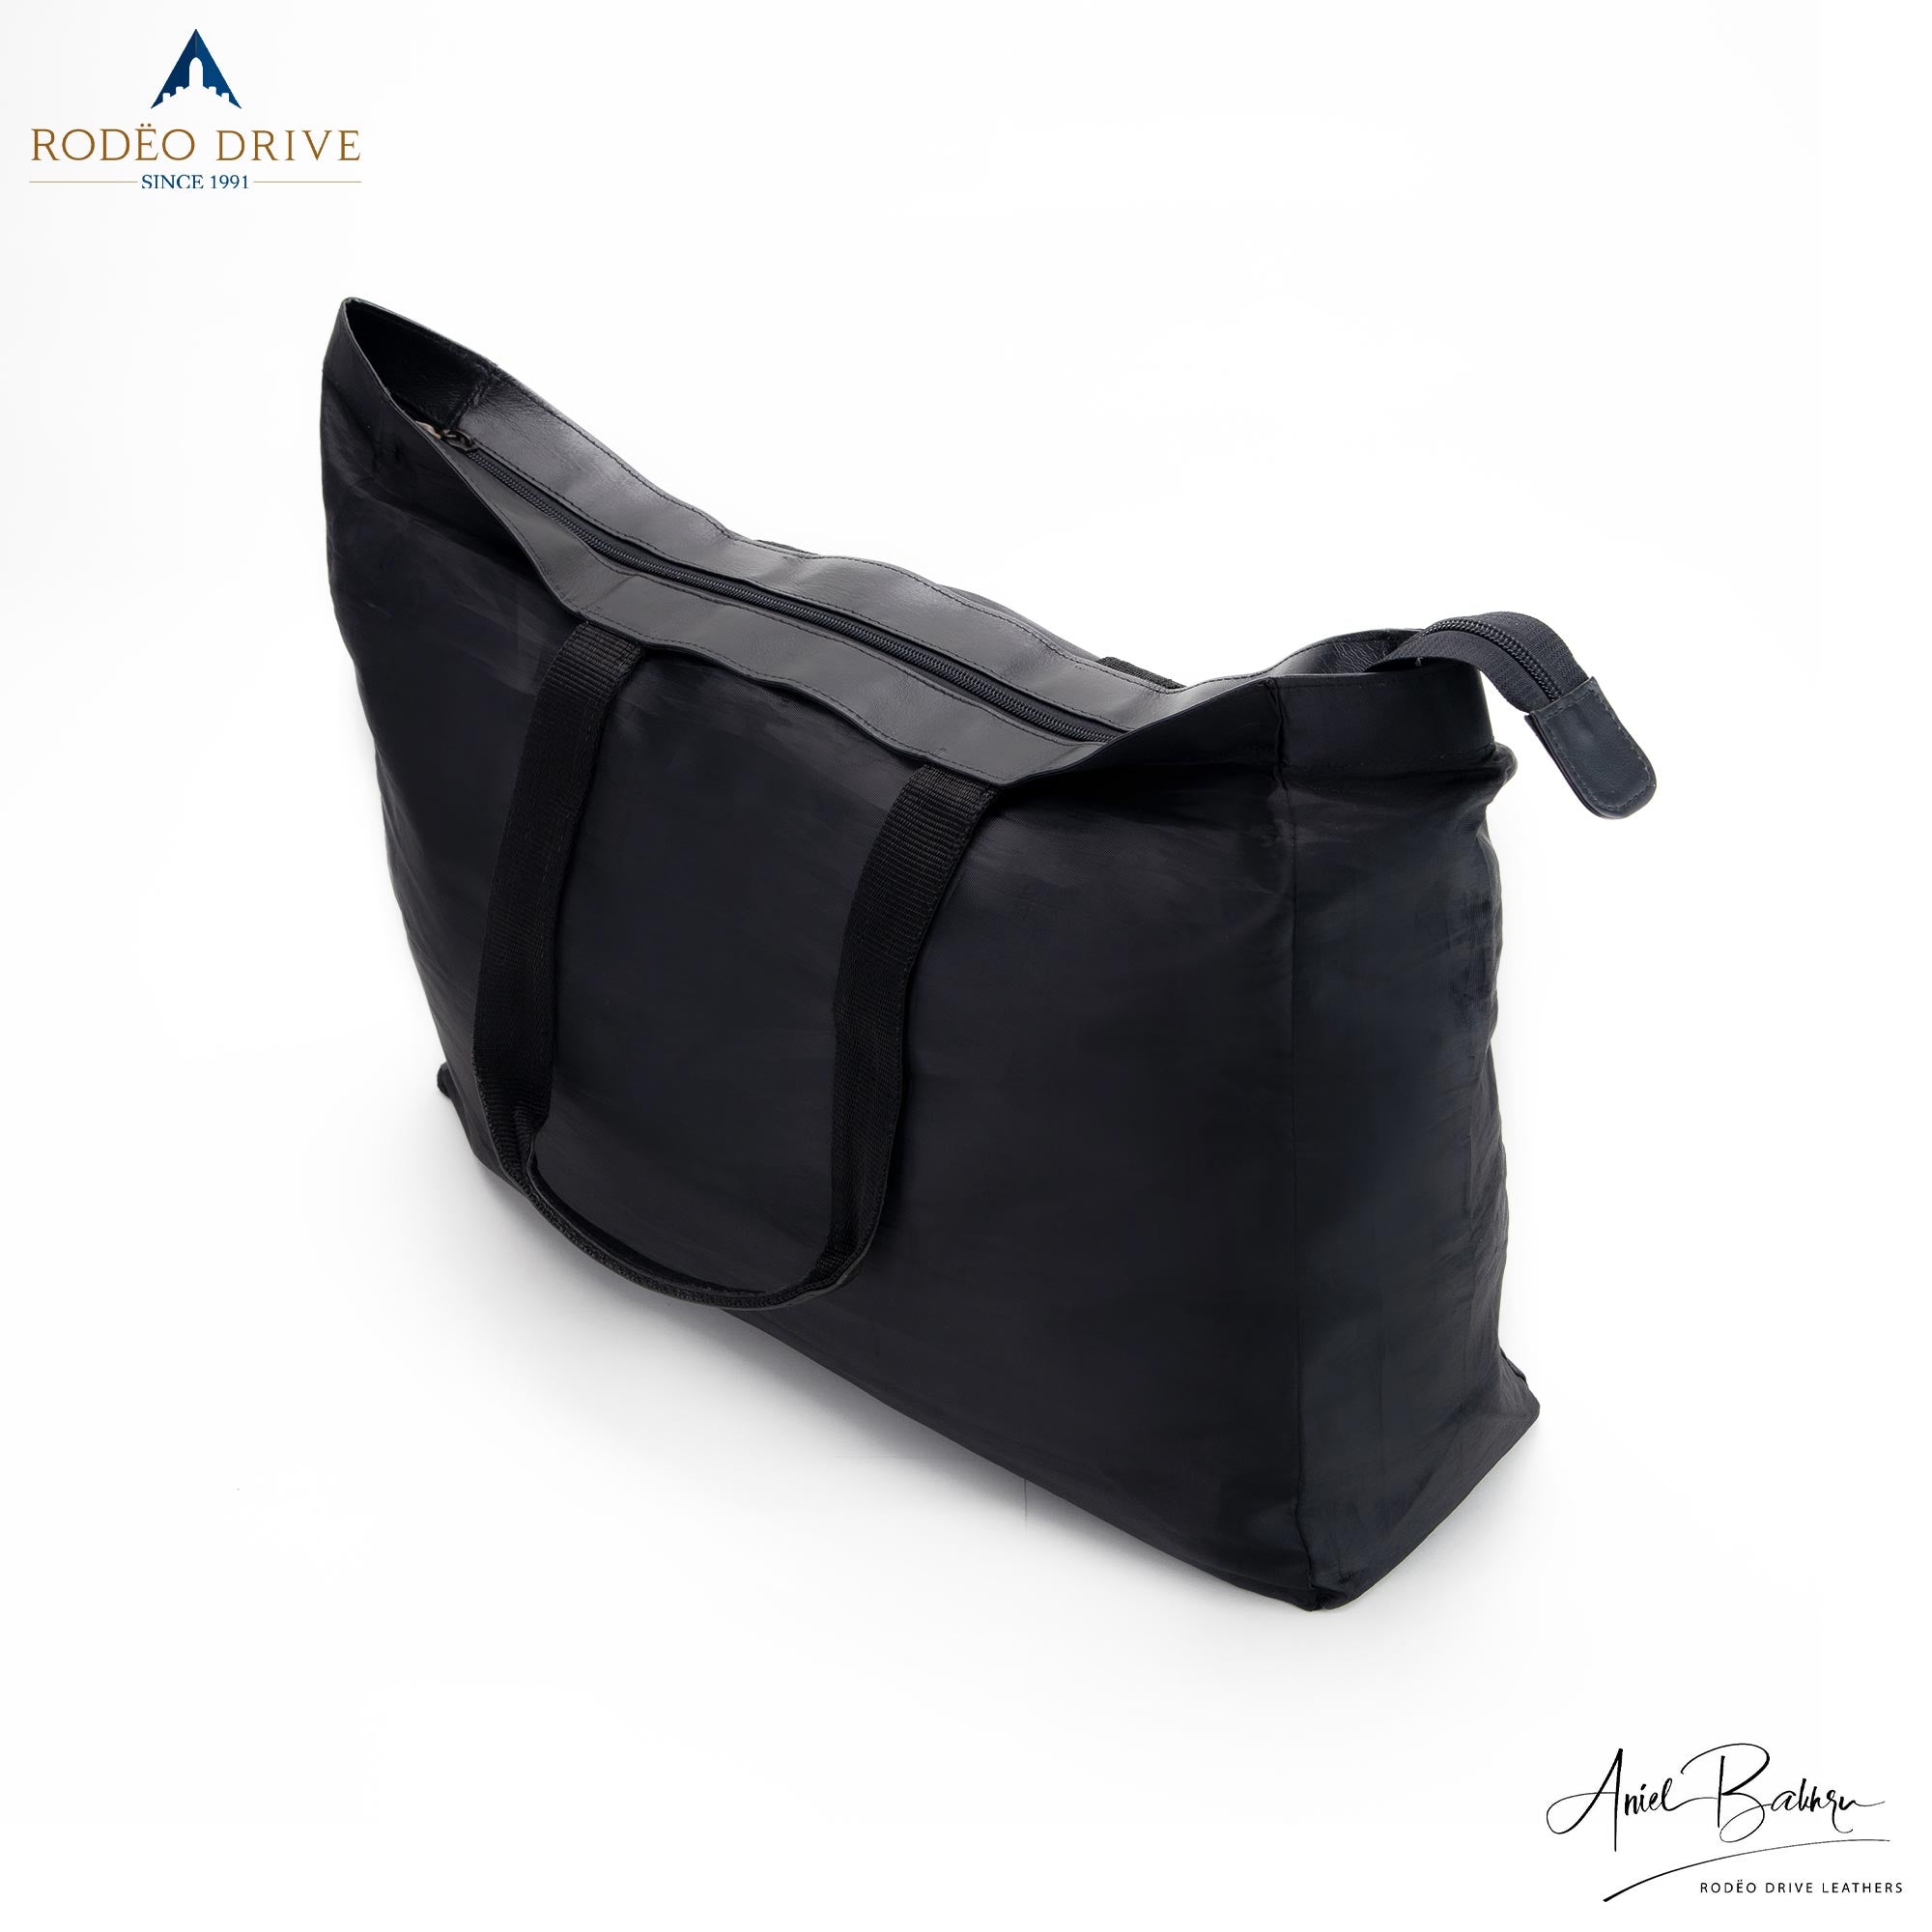 Side image of  black KELLY LEATHER SHOPPING BAG. Top of it is zipped.